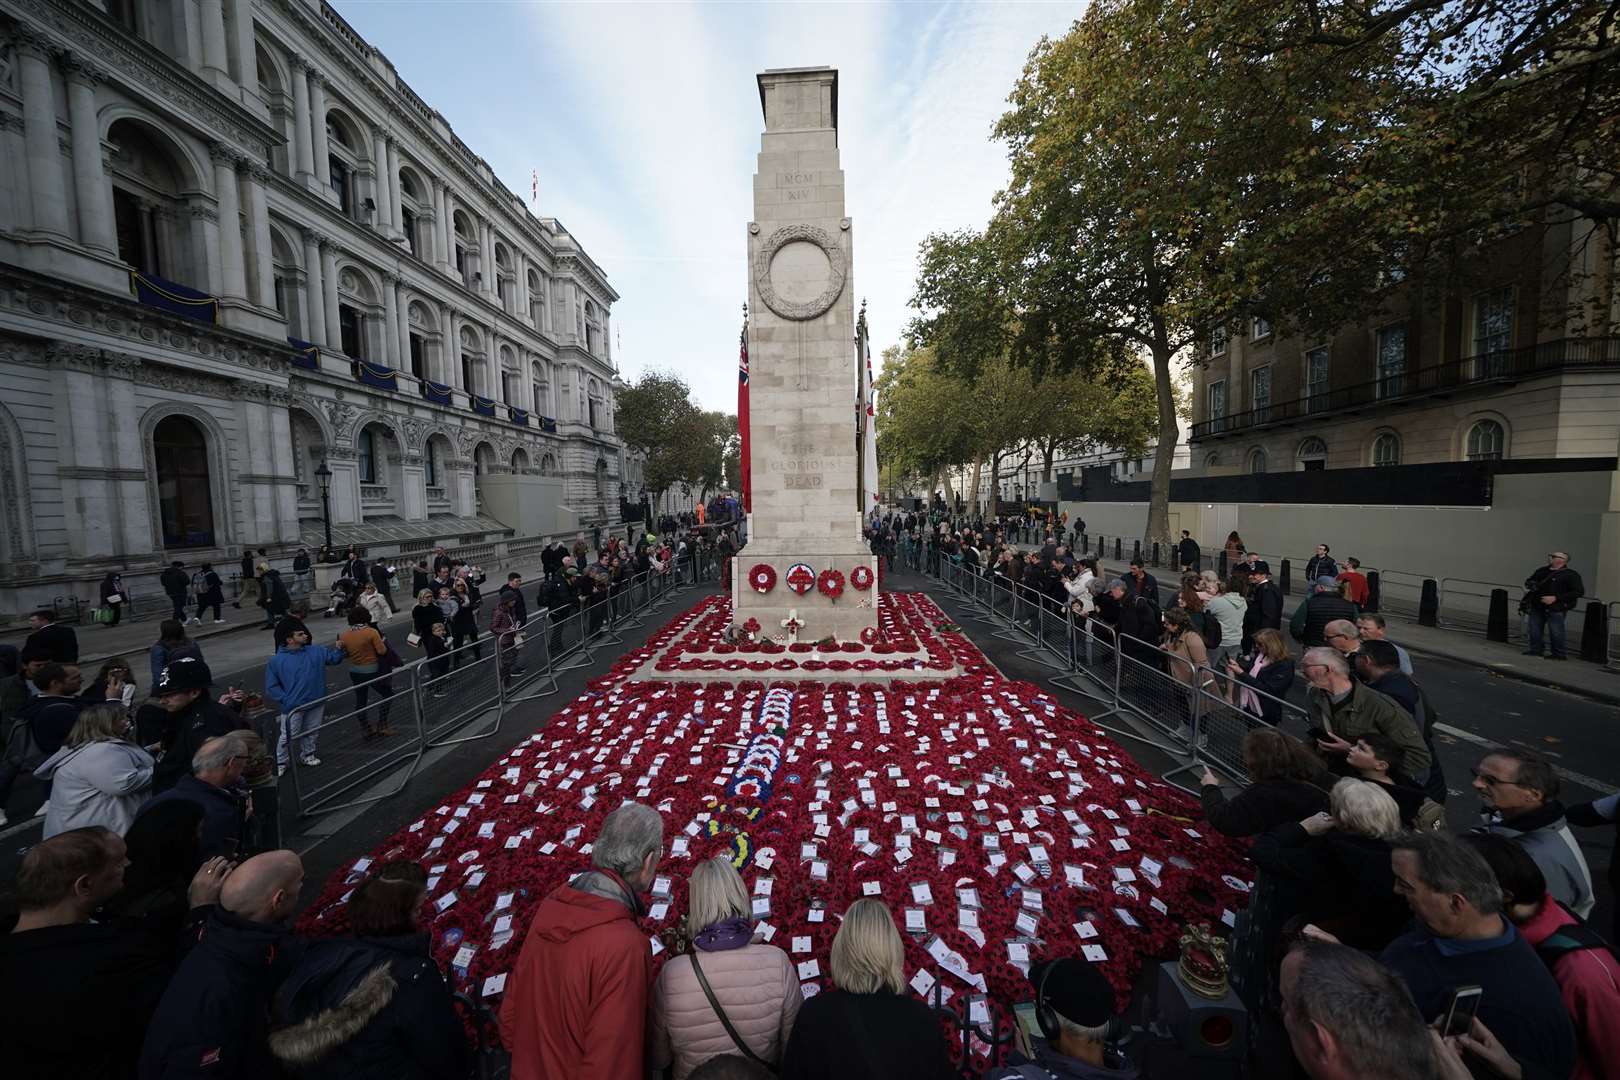 The scene at the Cenotaph in Whitehall, London following the national Remembrance Sunday service in 2022 (Yui Mok/PA)